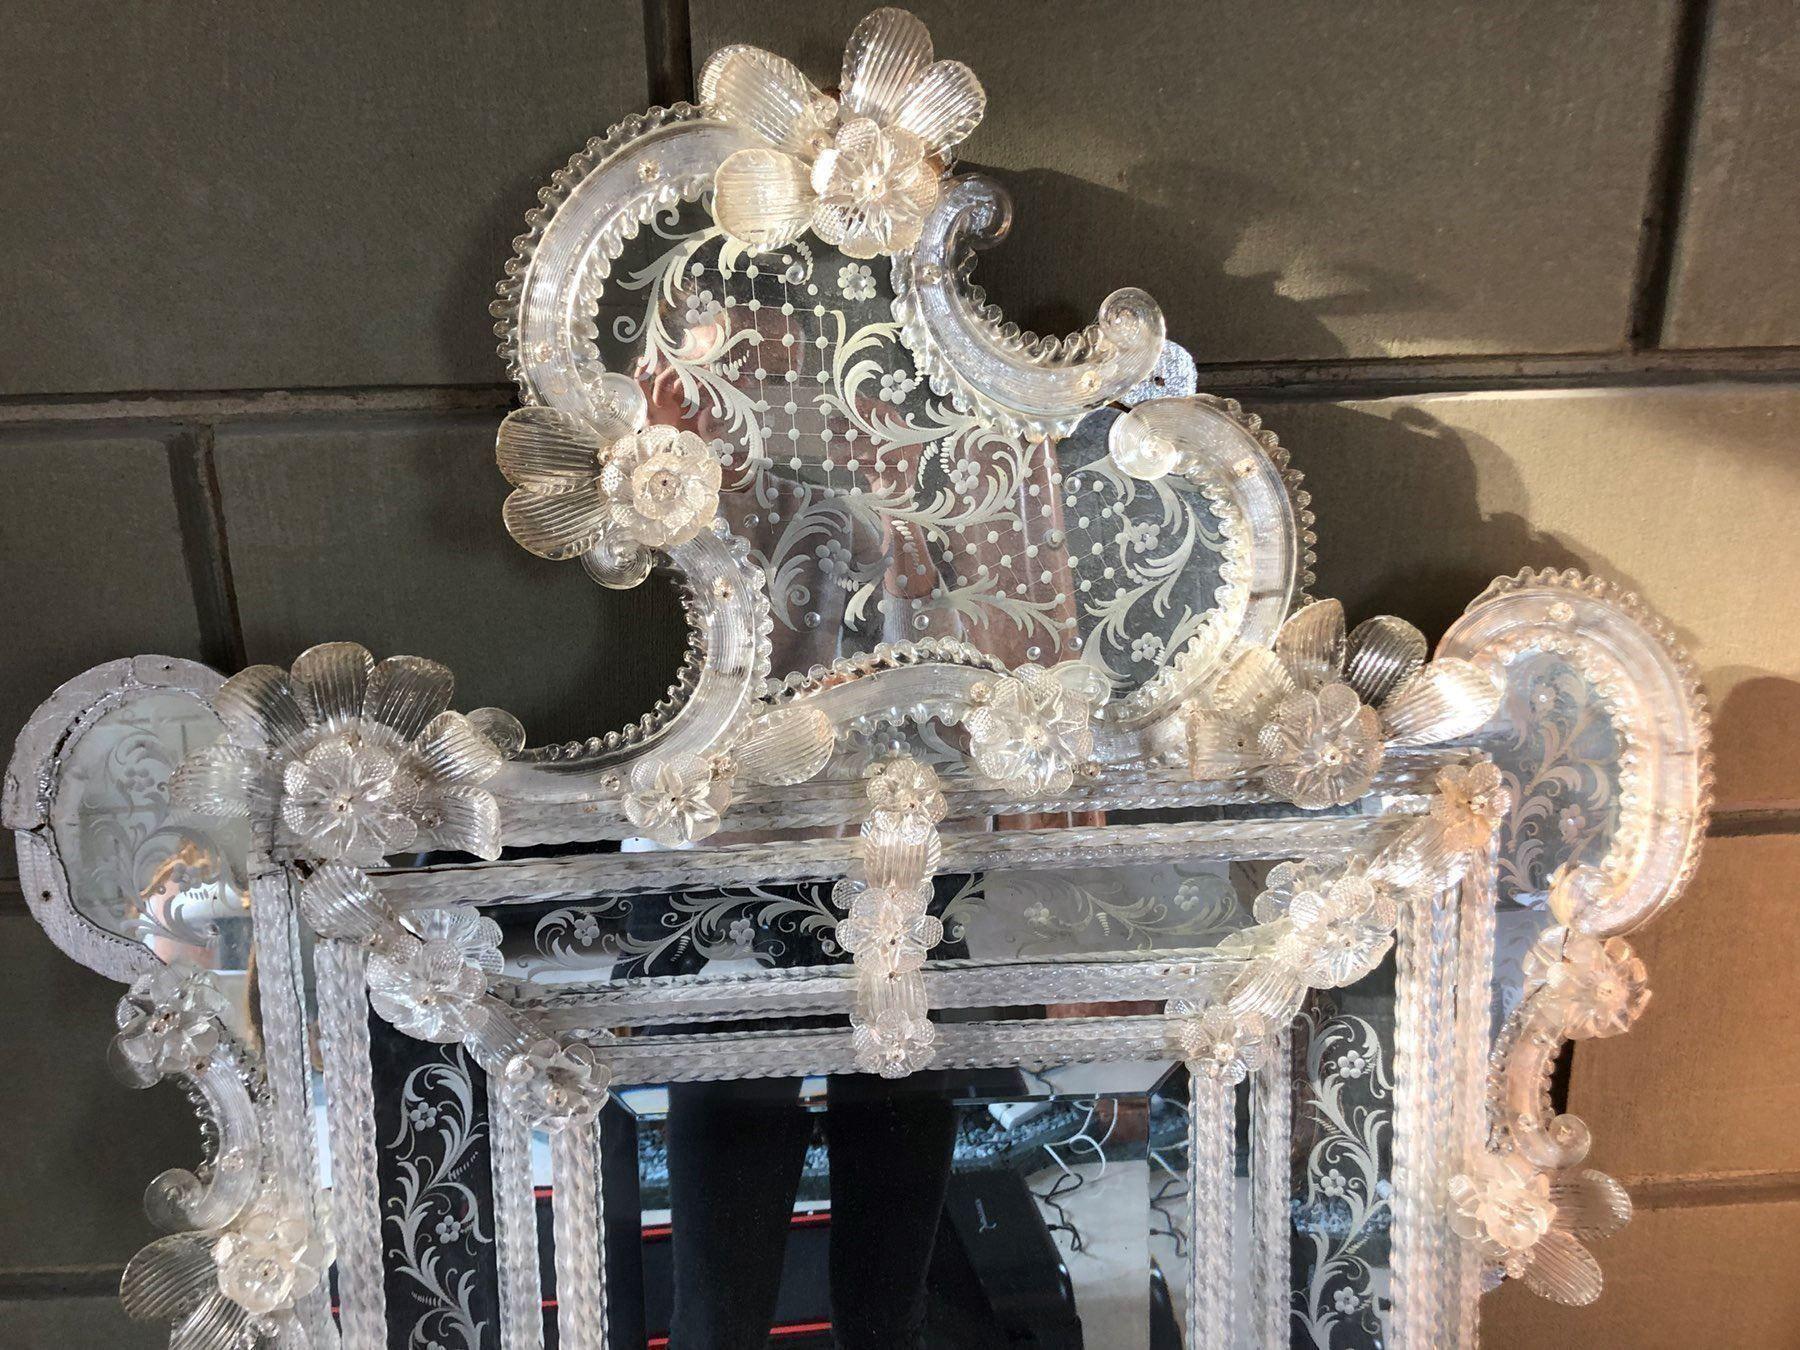 The rise of the Venetian mirror.
The Venetian mirror was born on the tiny Italian island of Murano in Venice in the 15th century. Venetian mirrors were painstakingly produced and creating one was a highly involved process. Upon completion, Venetian